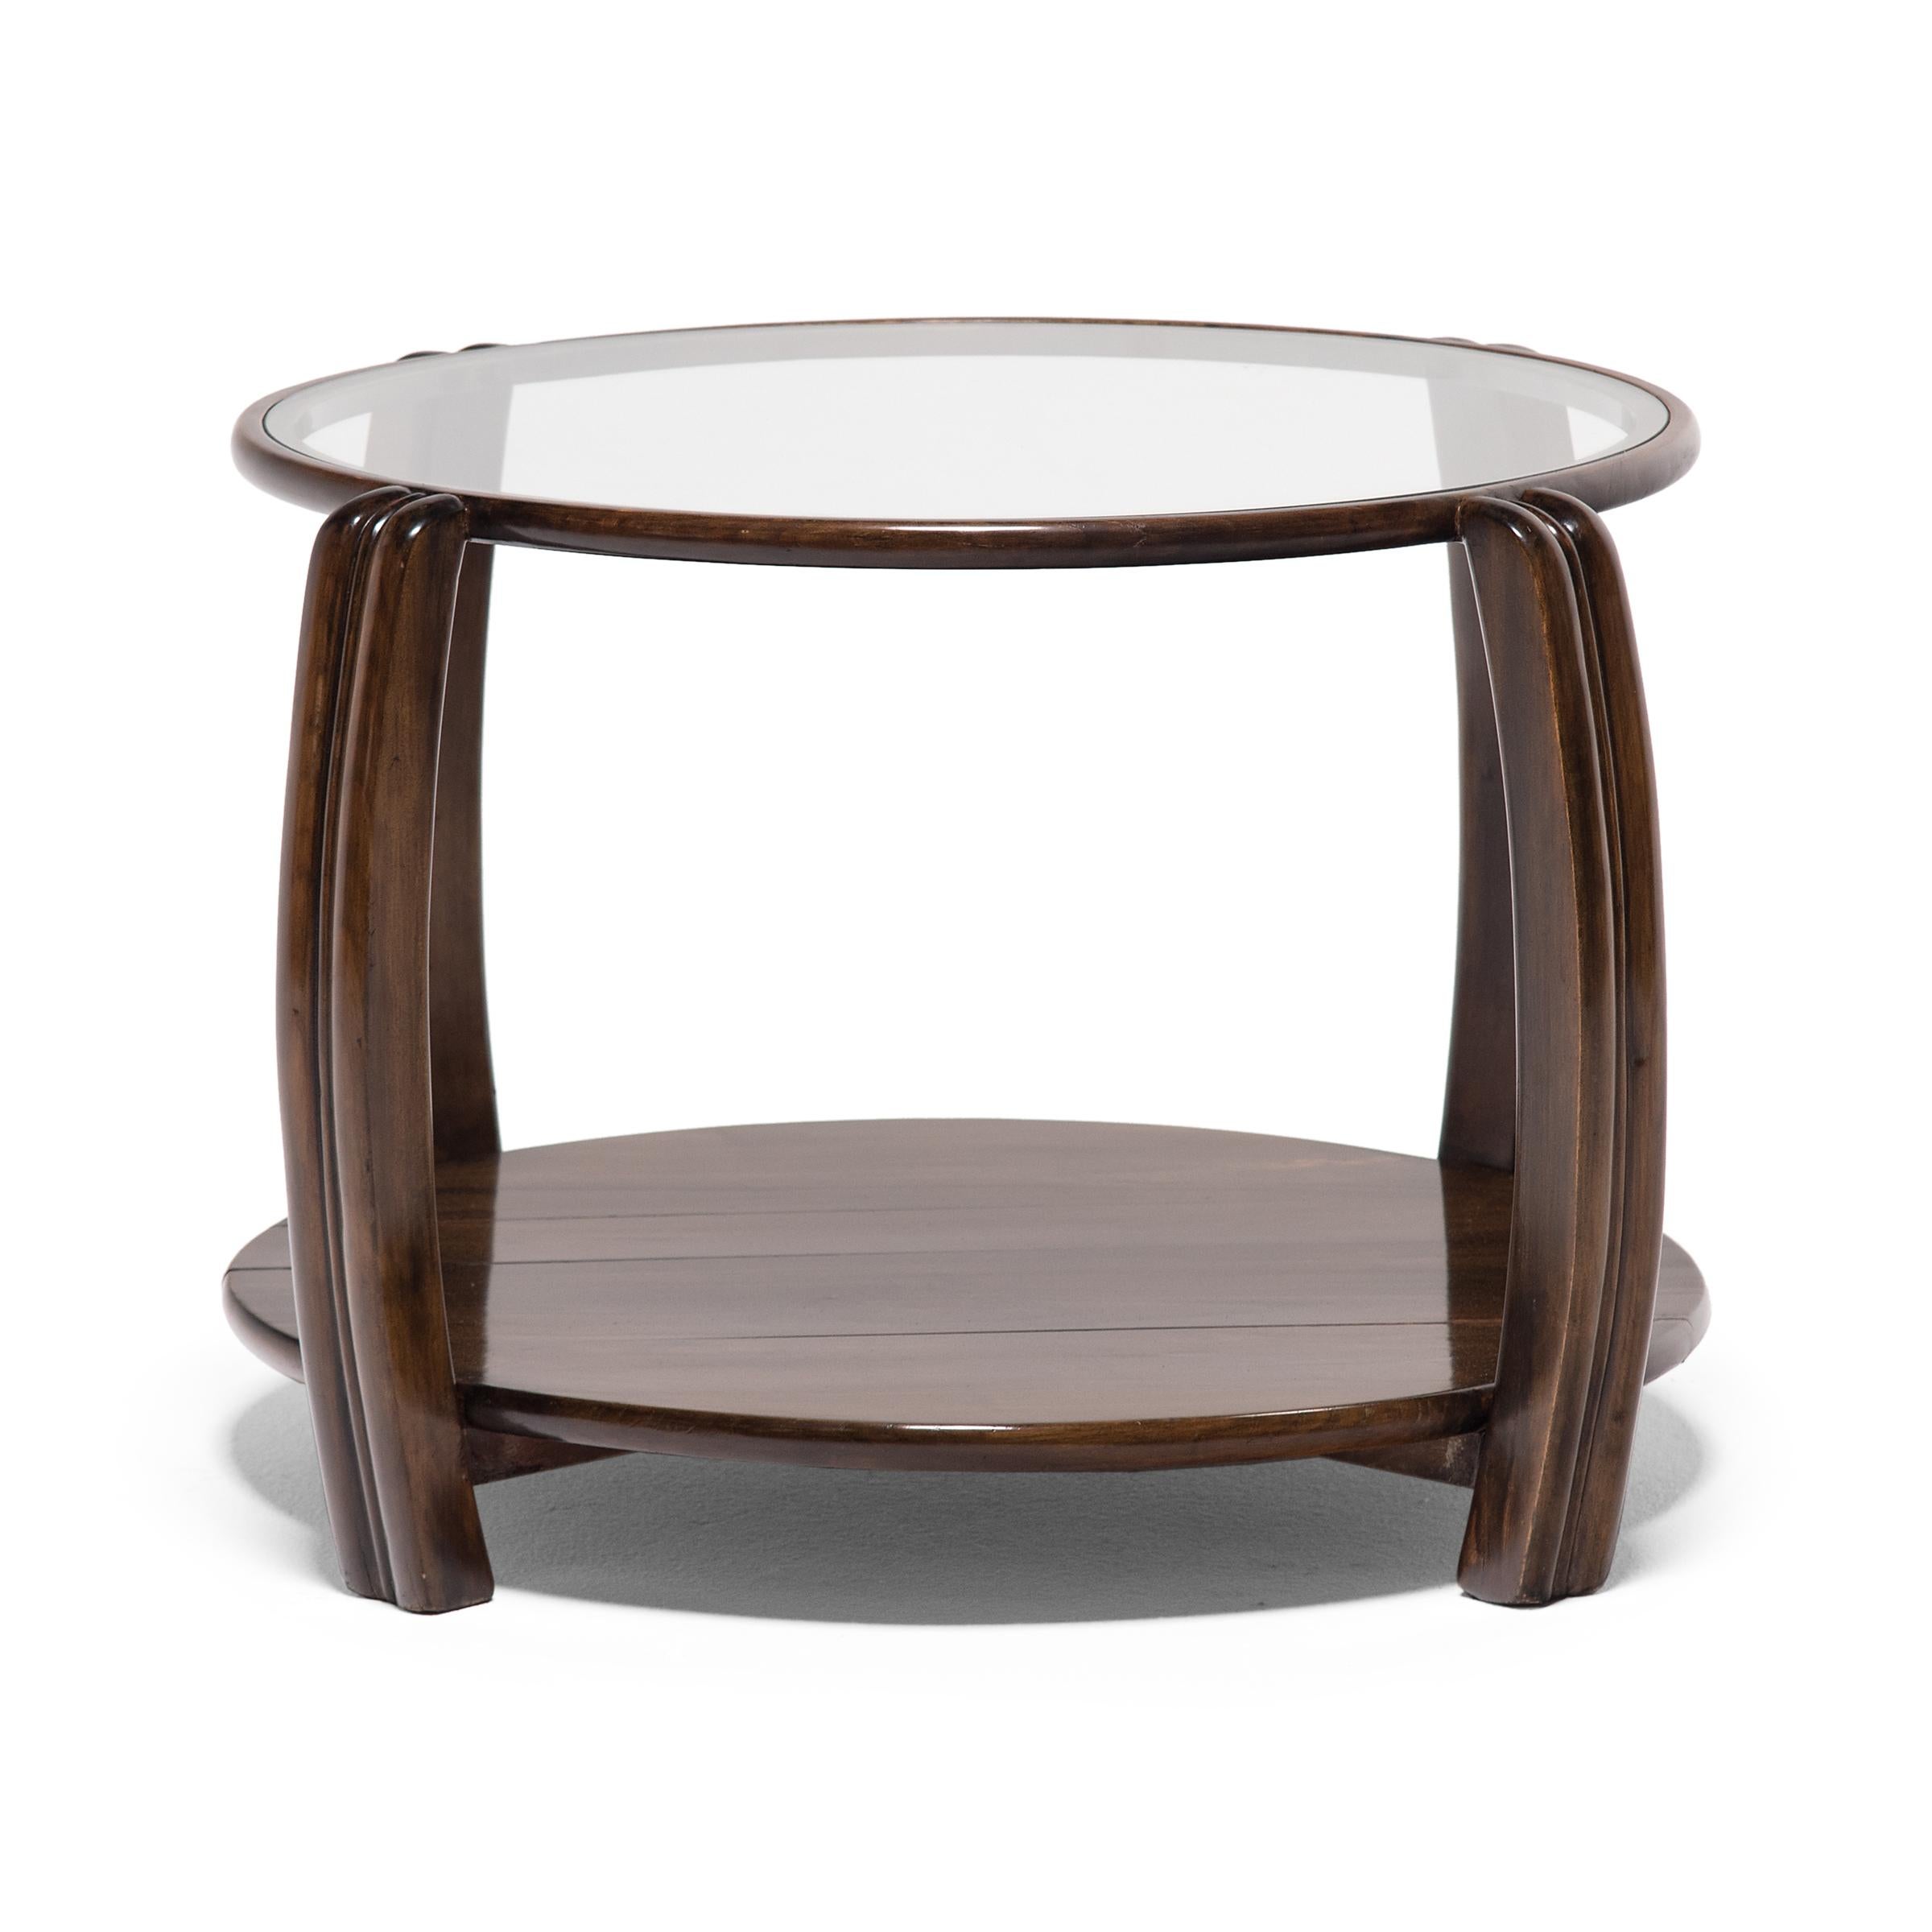 When the Art Deco movement reached major Chinese cities like Tianjin and Shanghai, the design aesthetic that emerged was the perfect intersection of European modernism and Ming-dynasty refinement. This round side table is a product of the era,